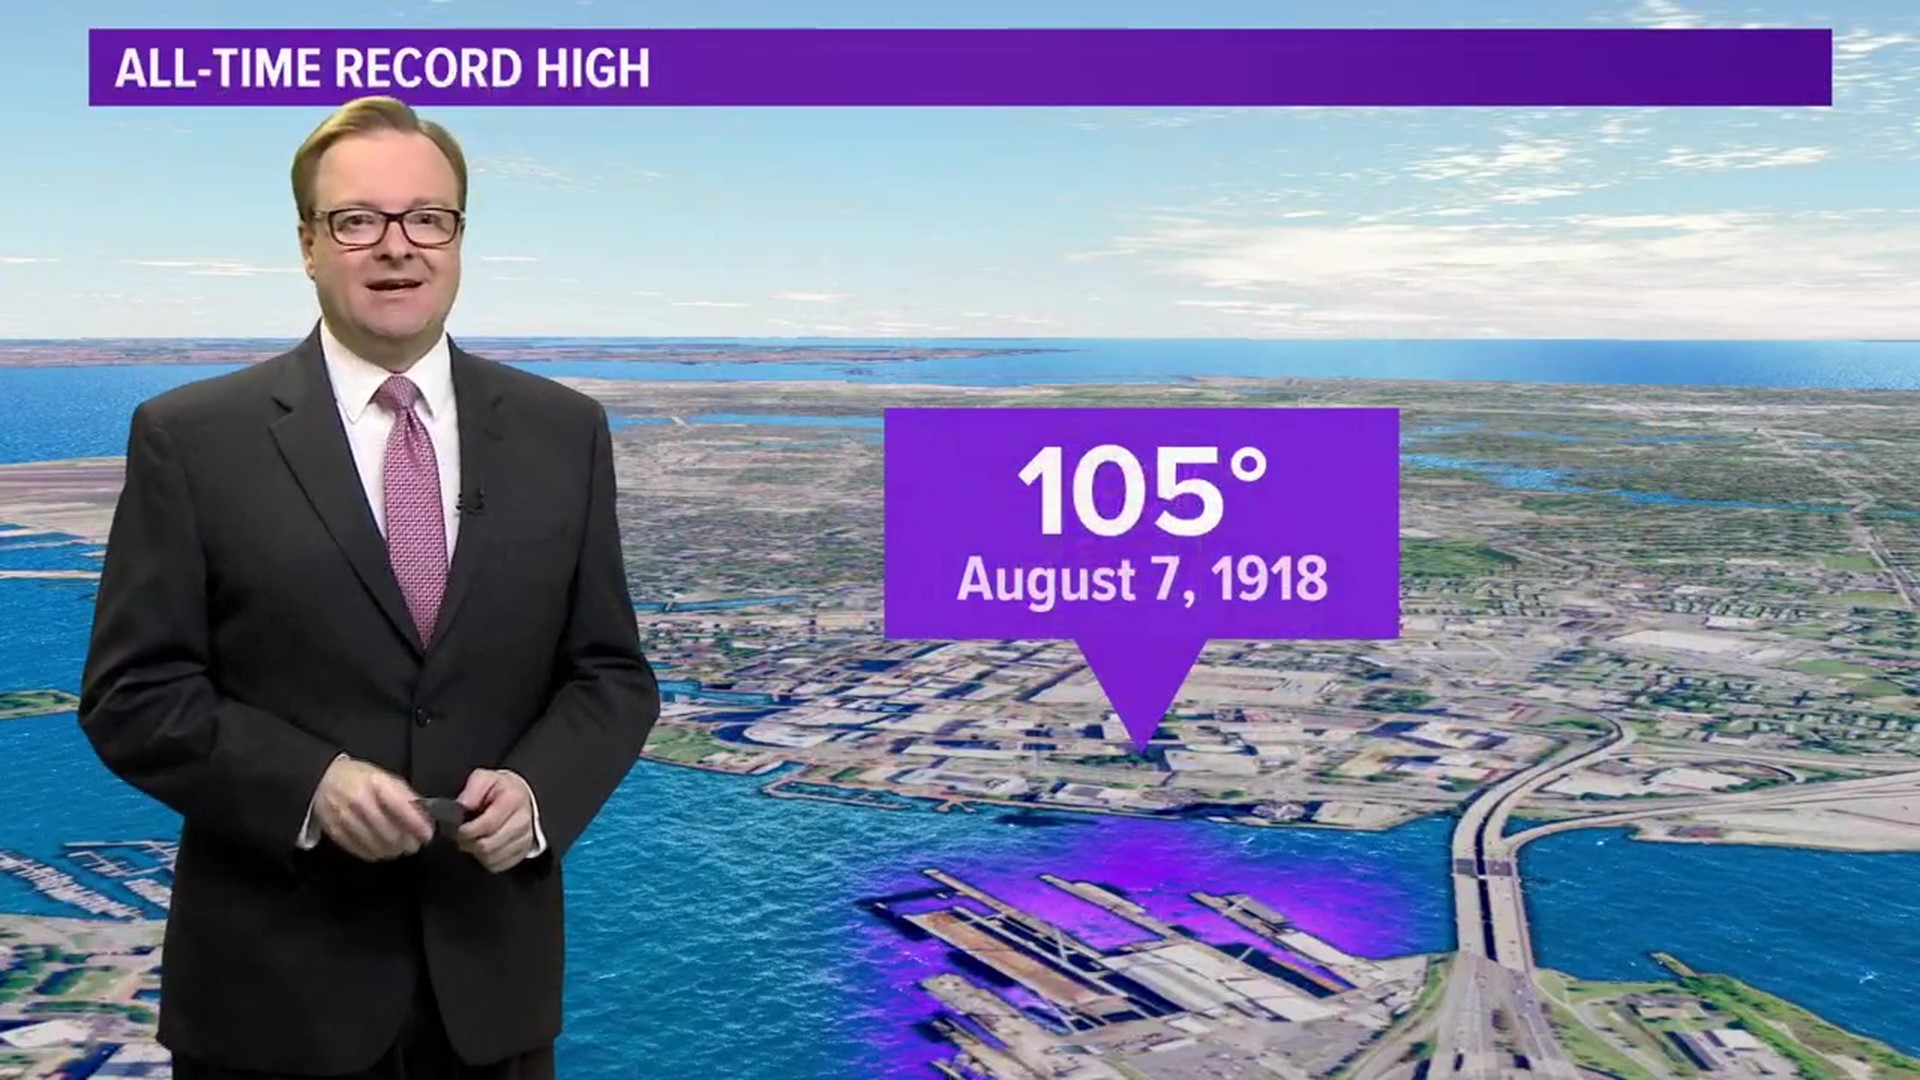 On August 7, 1918, Norfolk set an all-time record high. It was a record that would stand for nearly a century.